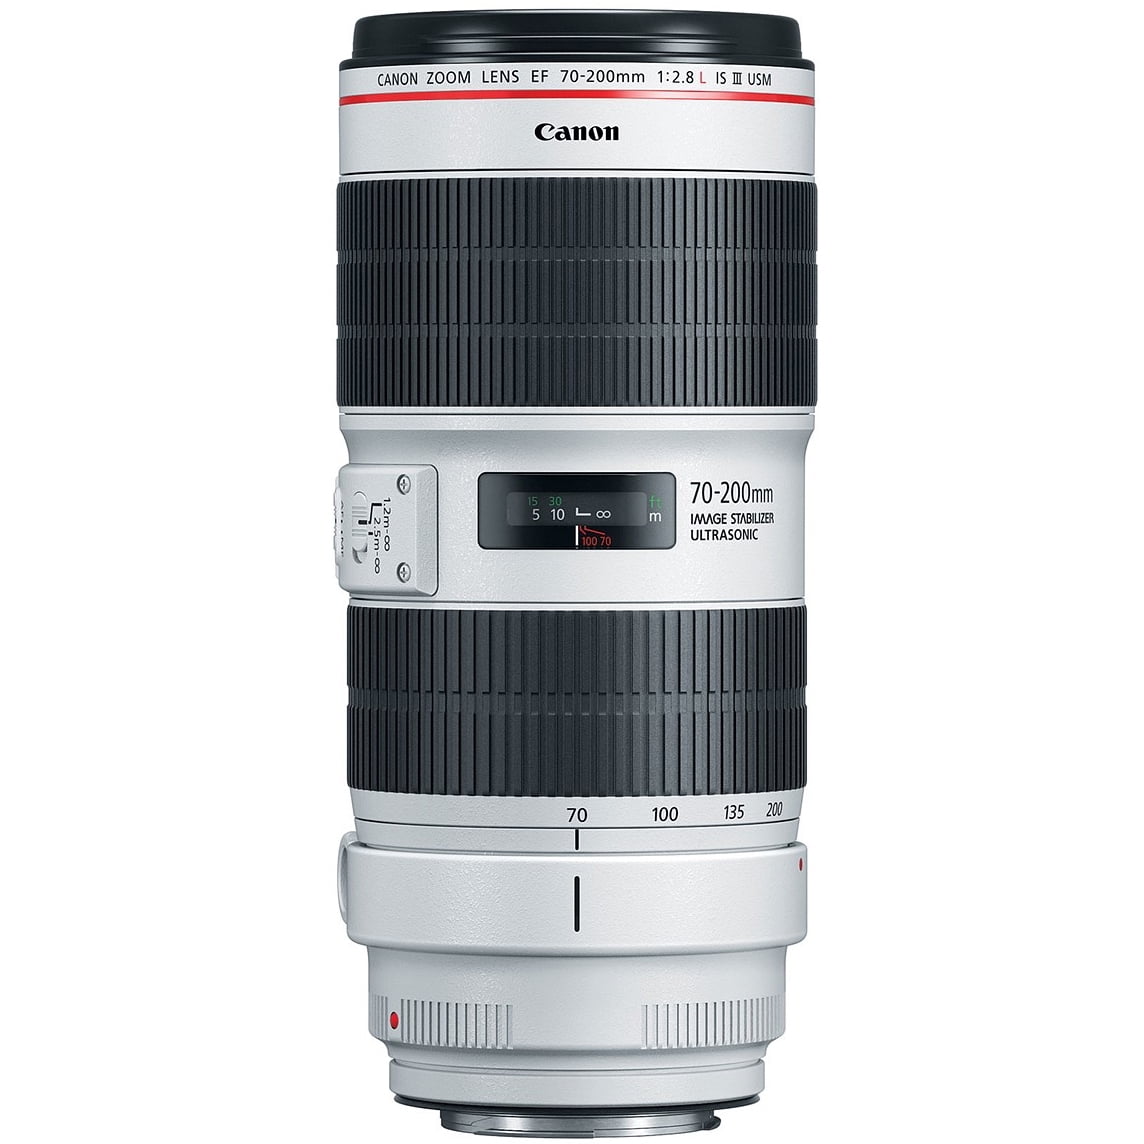 Canon EF 70-200mm f/2.8L IS III USM Telephoto Lens for Digital SLR Cameras  3044C002AA